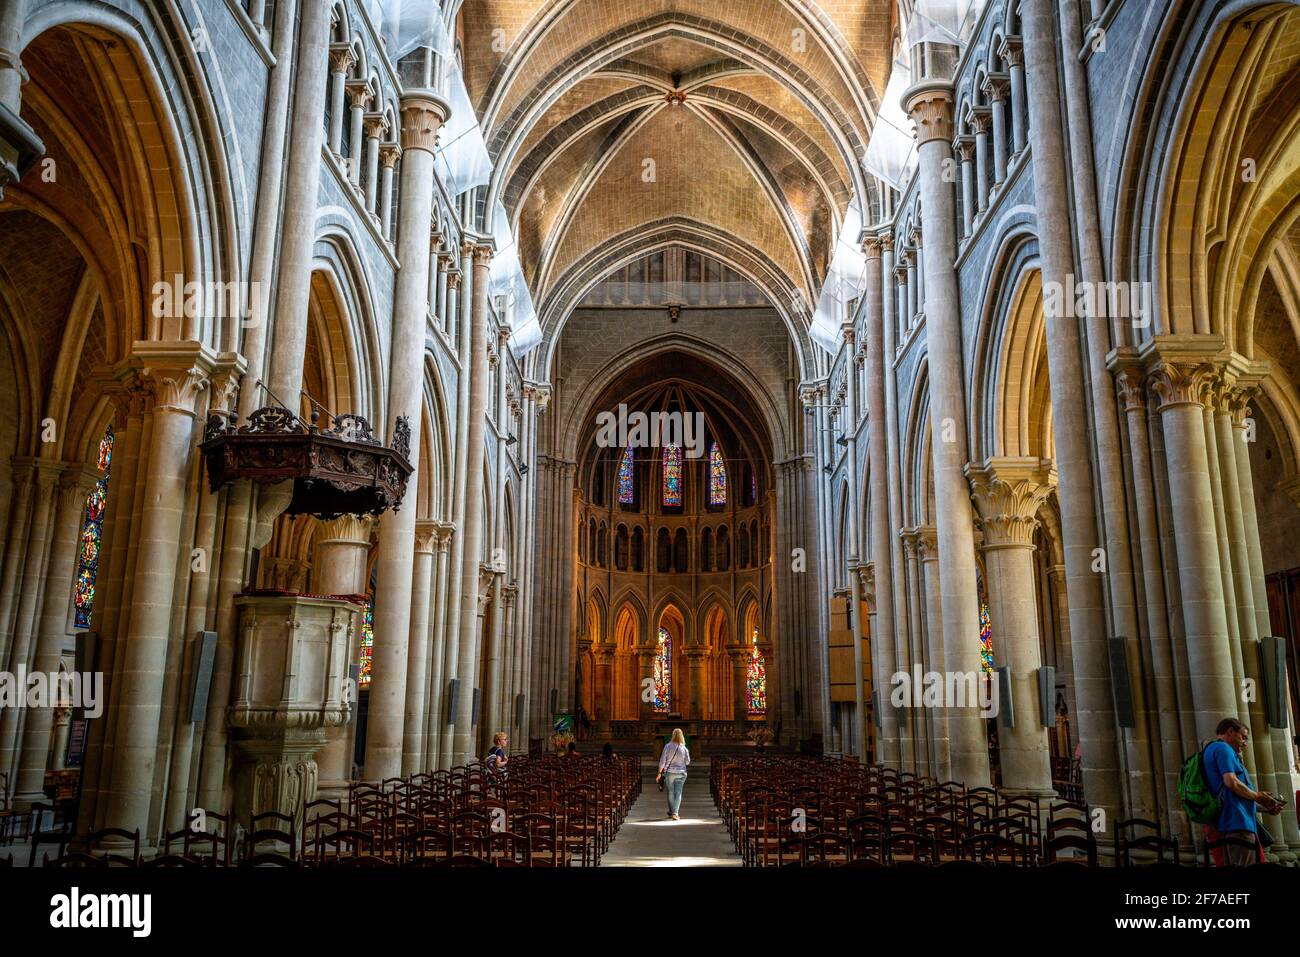 Lausanne Switzerland , 25 June 2020 : Interior view of the Cathedral of Notre Dame of Lausanne an evangelical reformed church in Lausanne Vaud Switzer Stock Photo